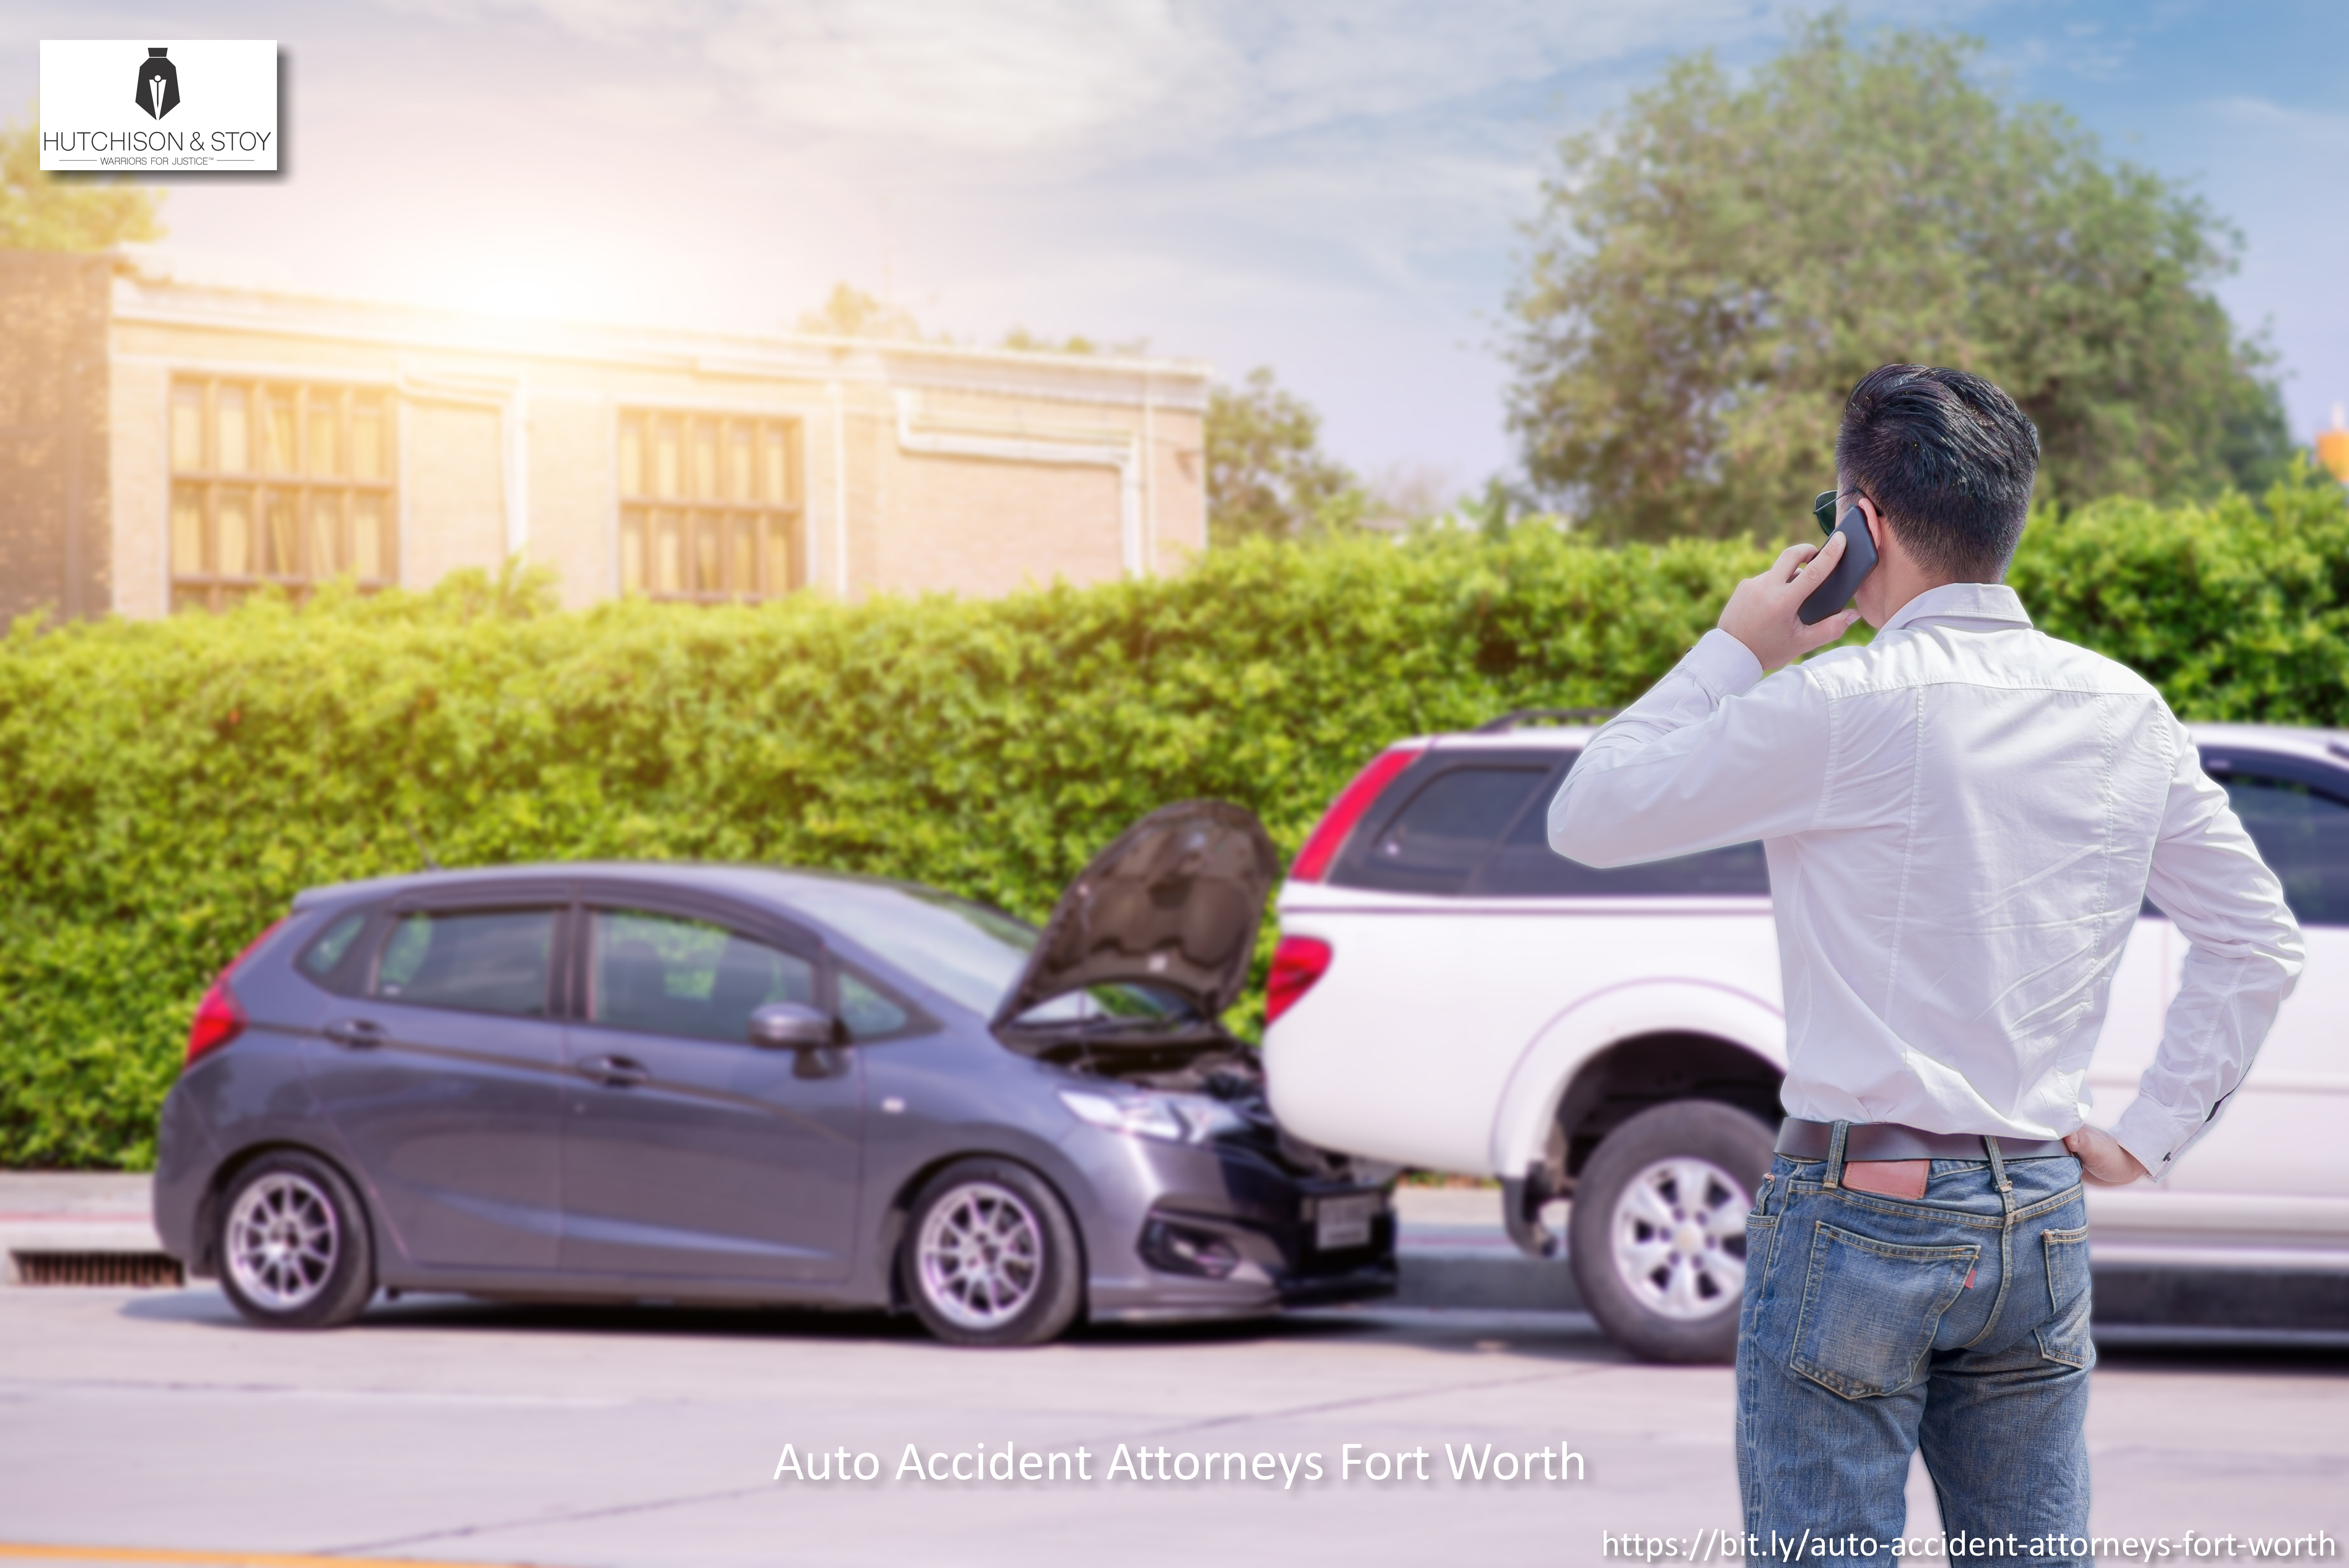 Stoy Law Group, PLLC Outlines How a Personal Injury Lawyer Helps Car Accident Victims